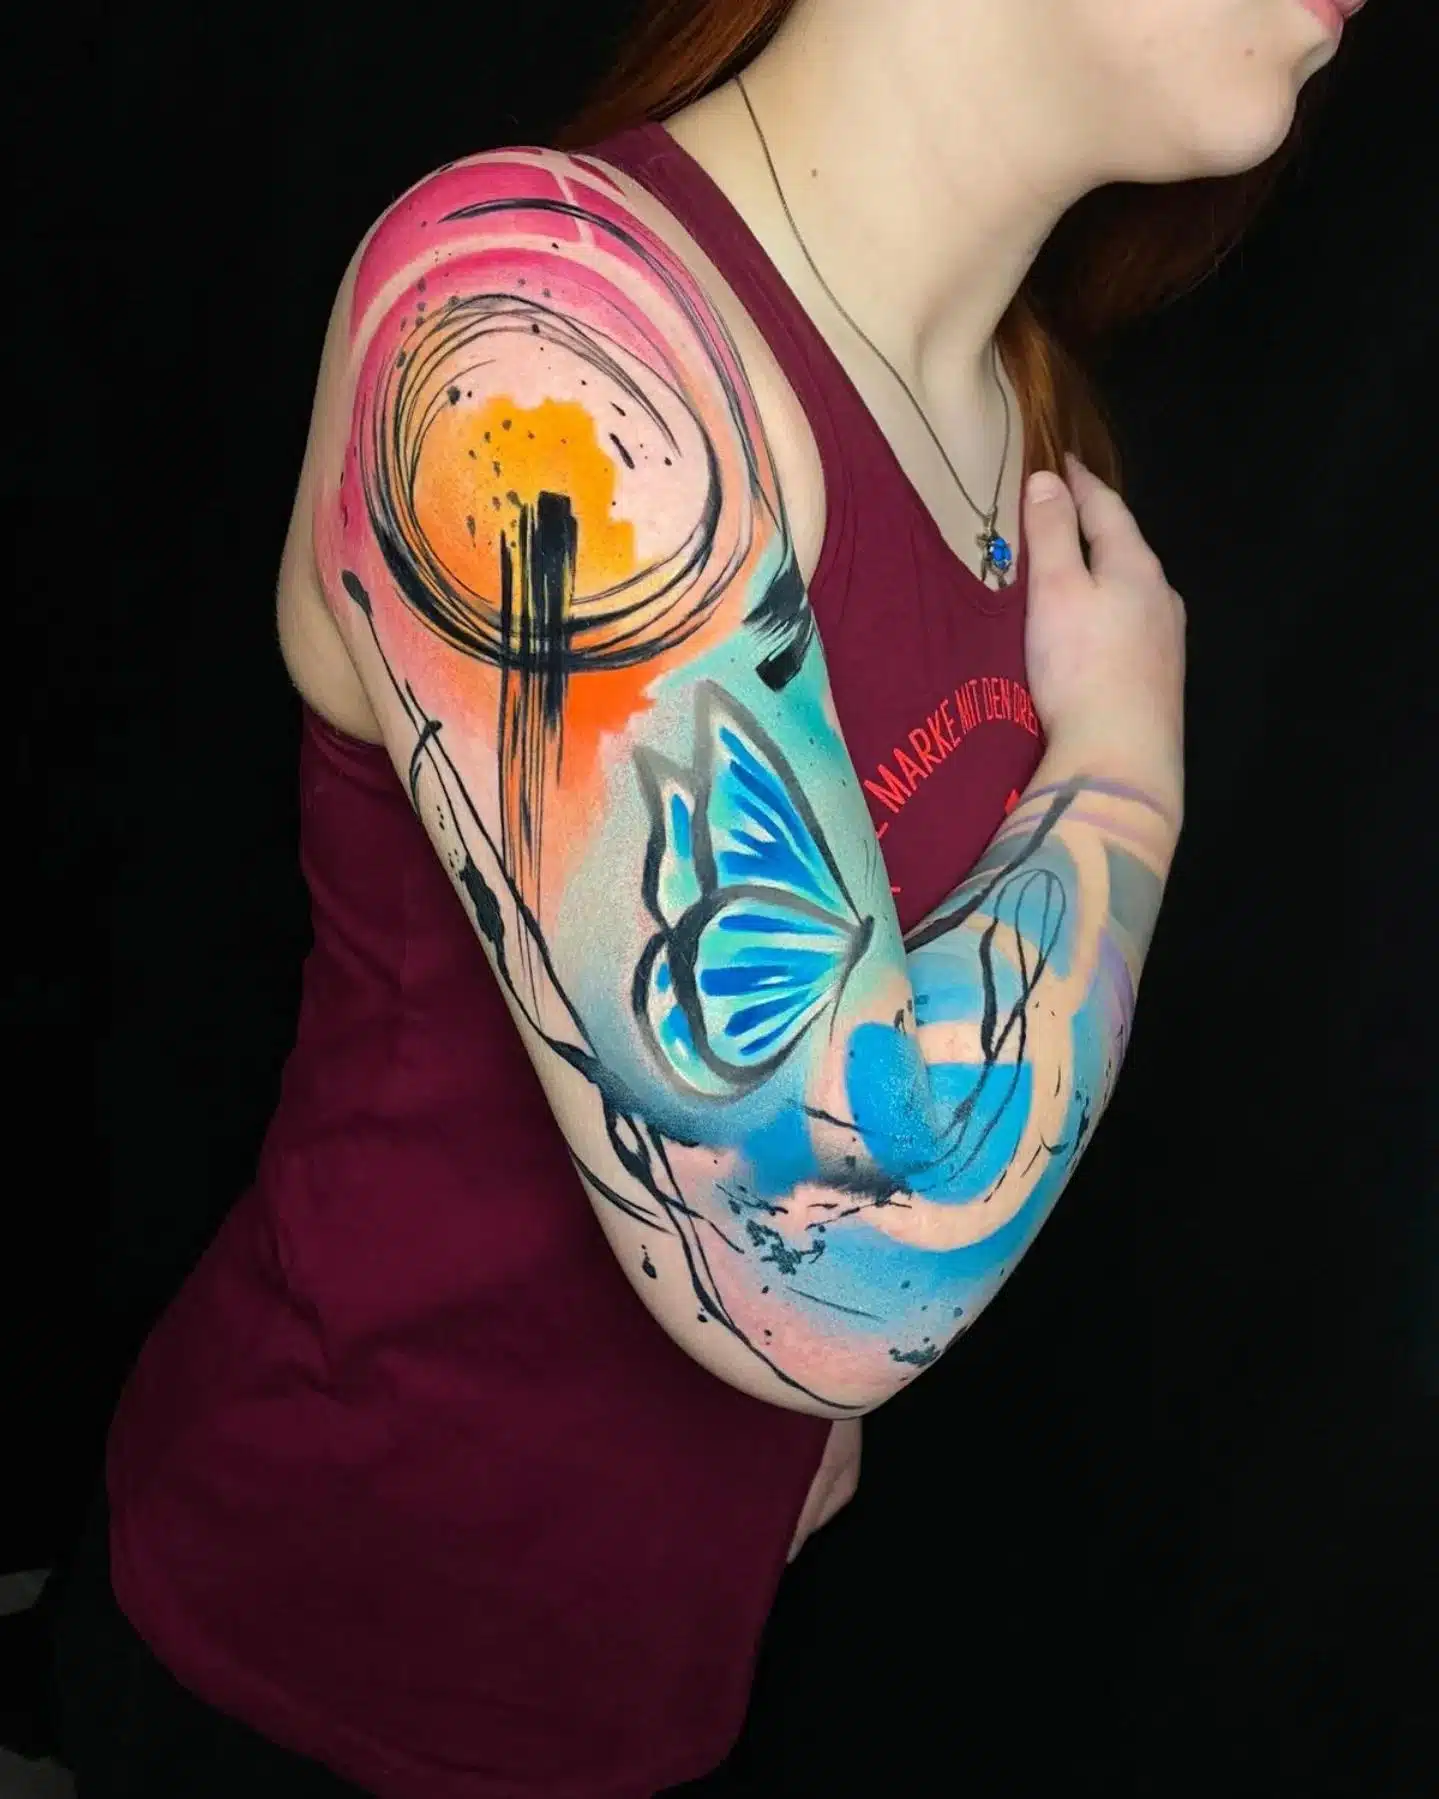 Let's get back onto posting some amazing tattoos again shall we!
Here's an absolutely stunning avant-garde sleeve by Noemi. 
noemi_tattoo 
Done using:
dragonhawkofficial
eternalink 
magnumtattoosupplies.uk unigloves 

                 
       